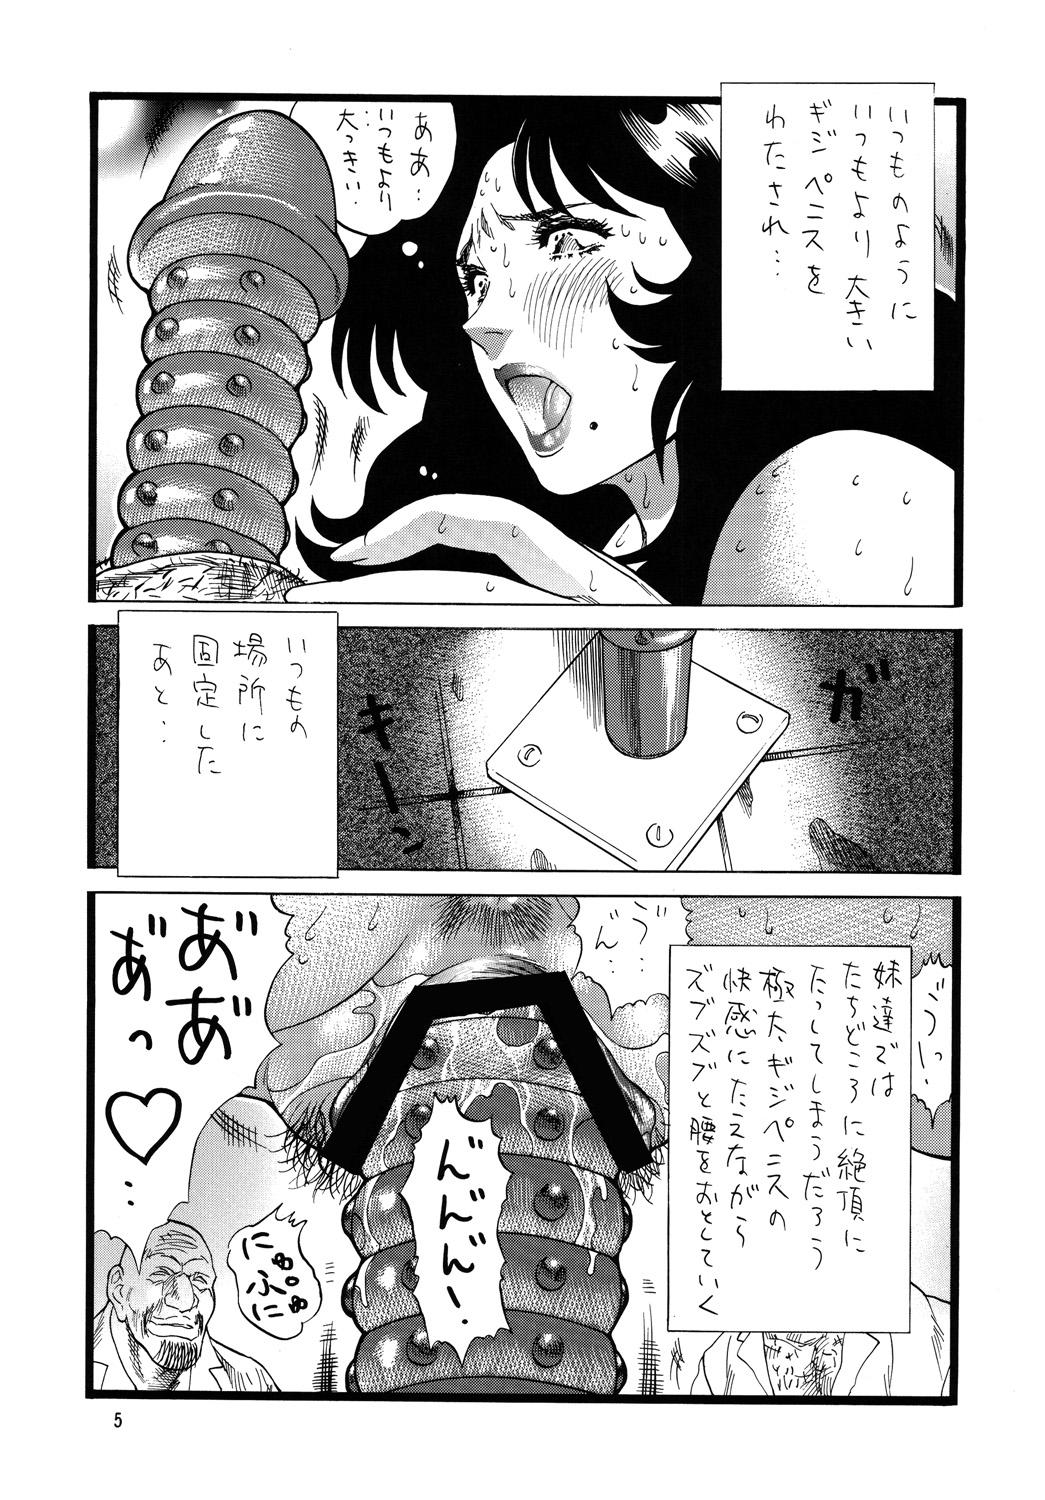 Rough CAT'S HUNTER - City hunter Cats eye Massages - Page 4